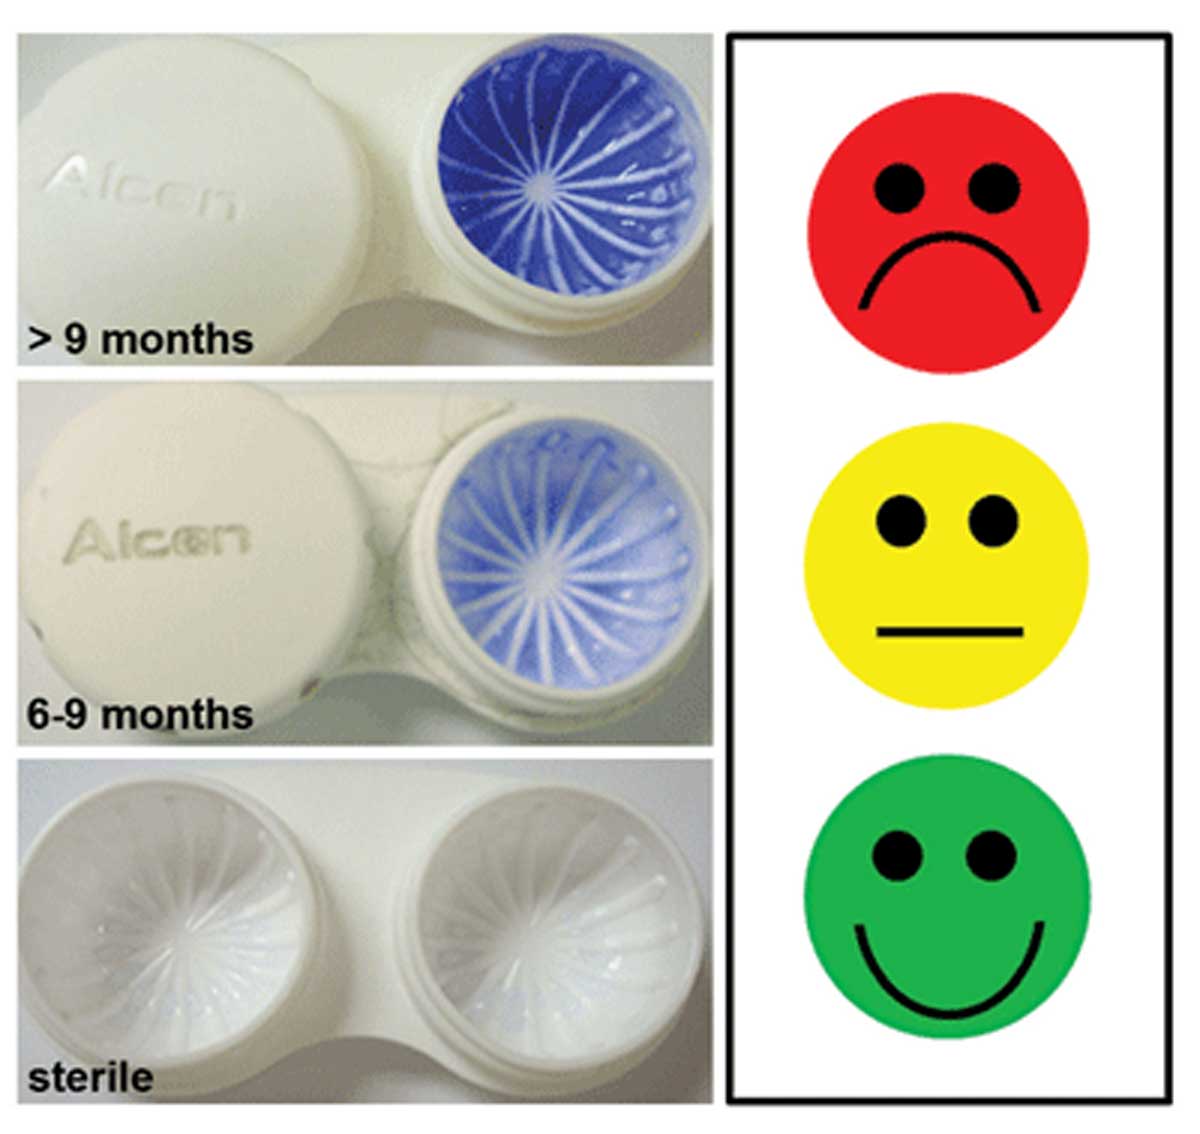 Consistently reminding contact lens wearers to properly clean their lens cases may help improve the currently low rates of compliance.